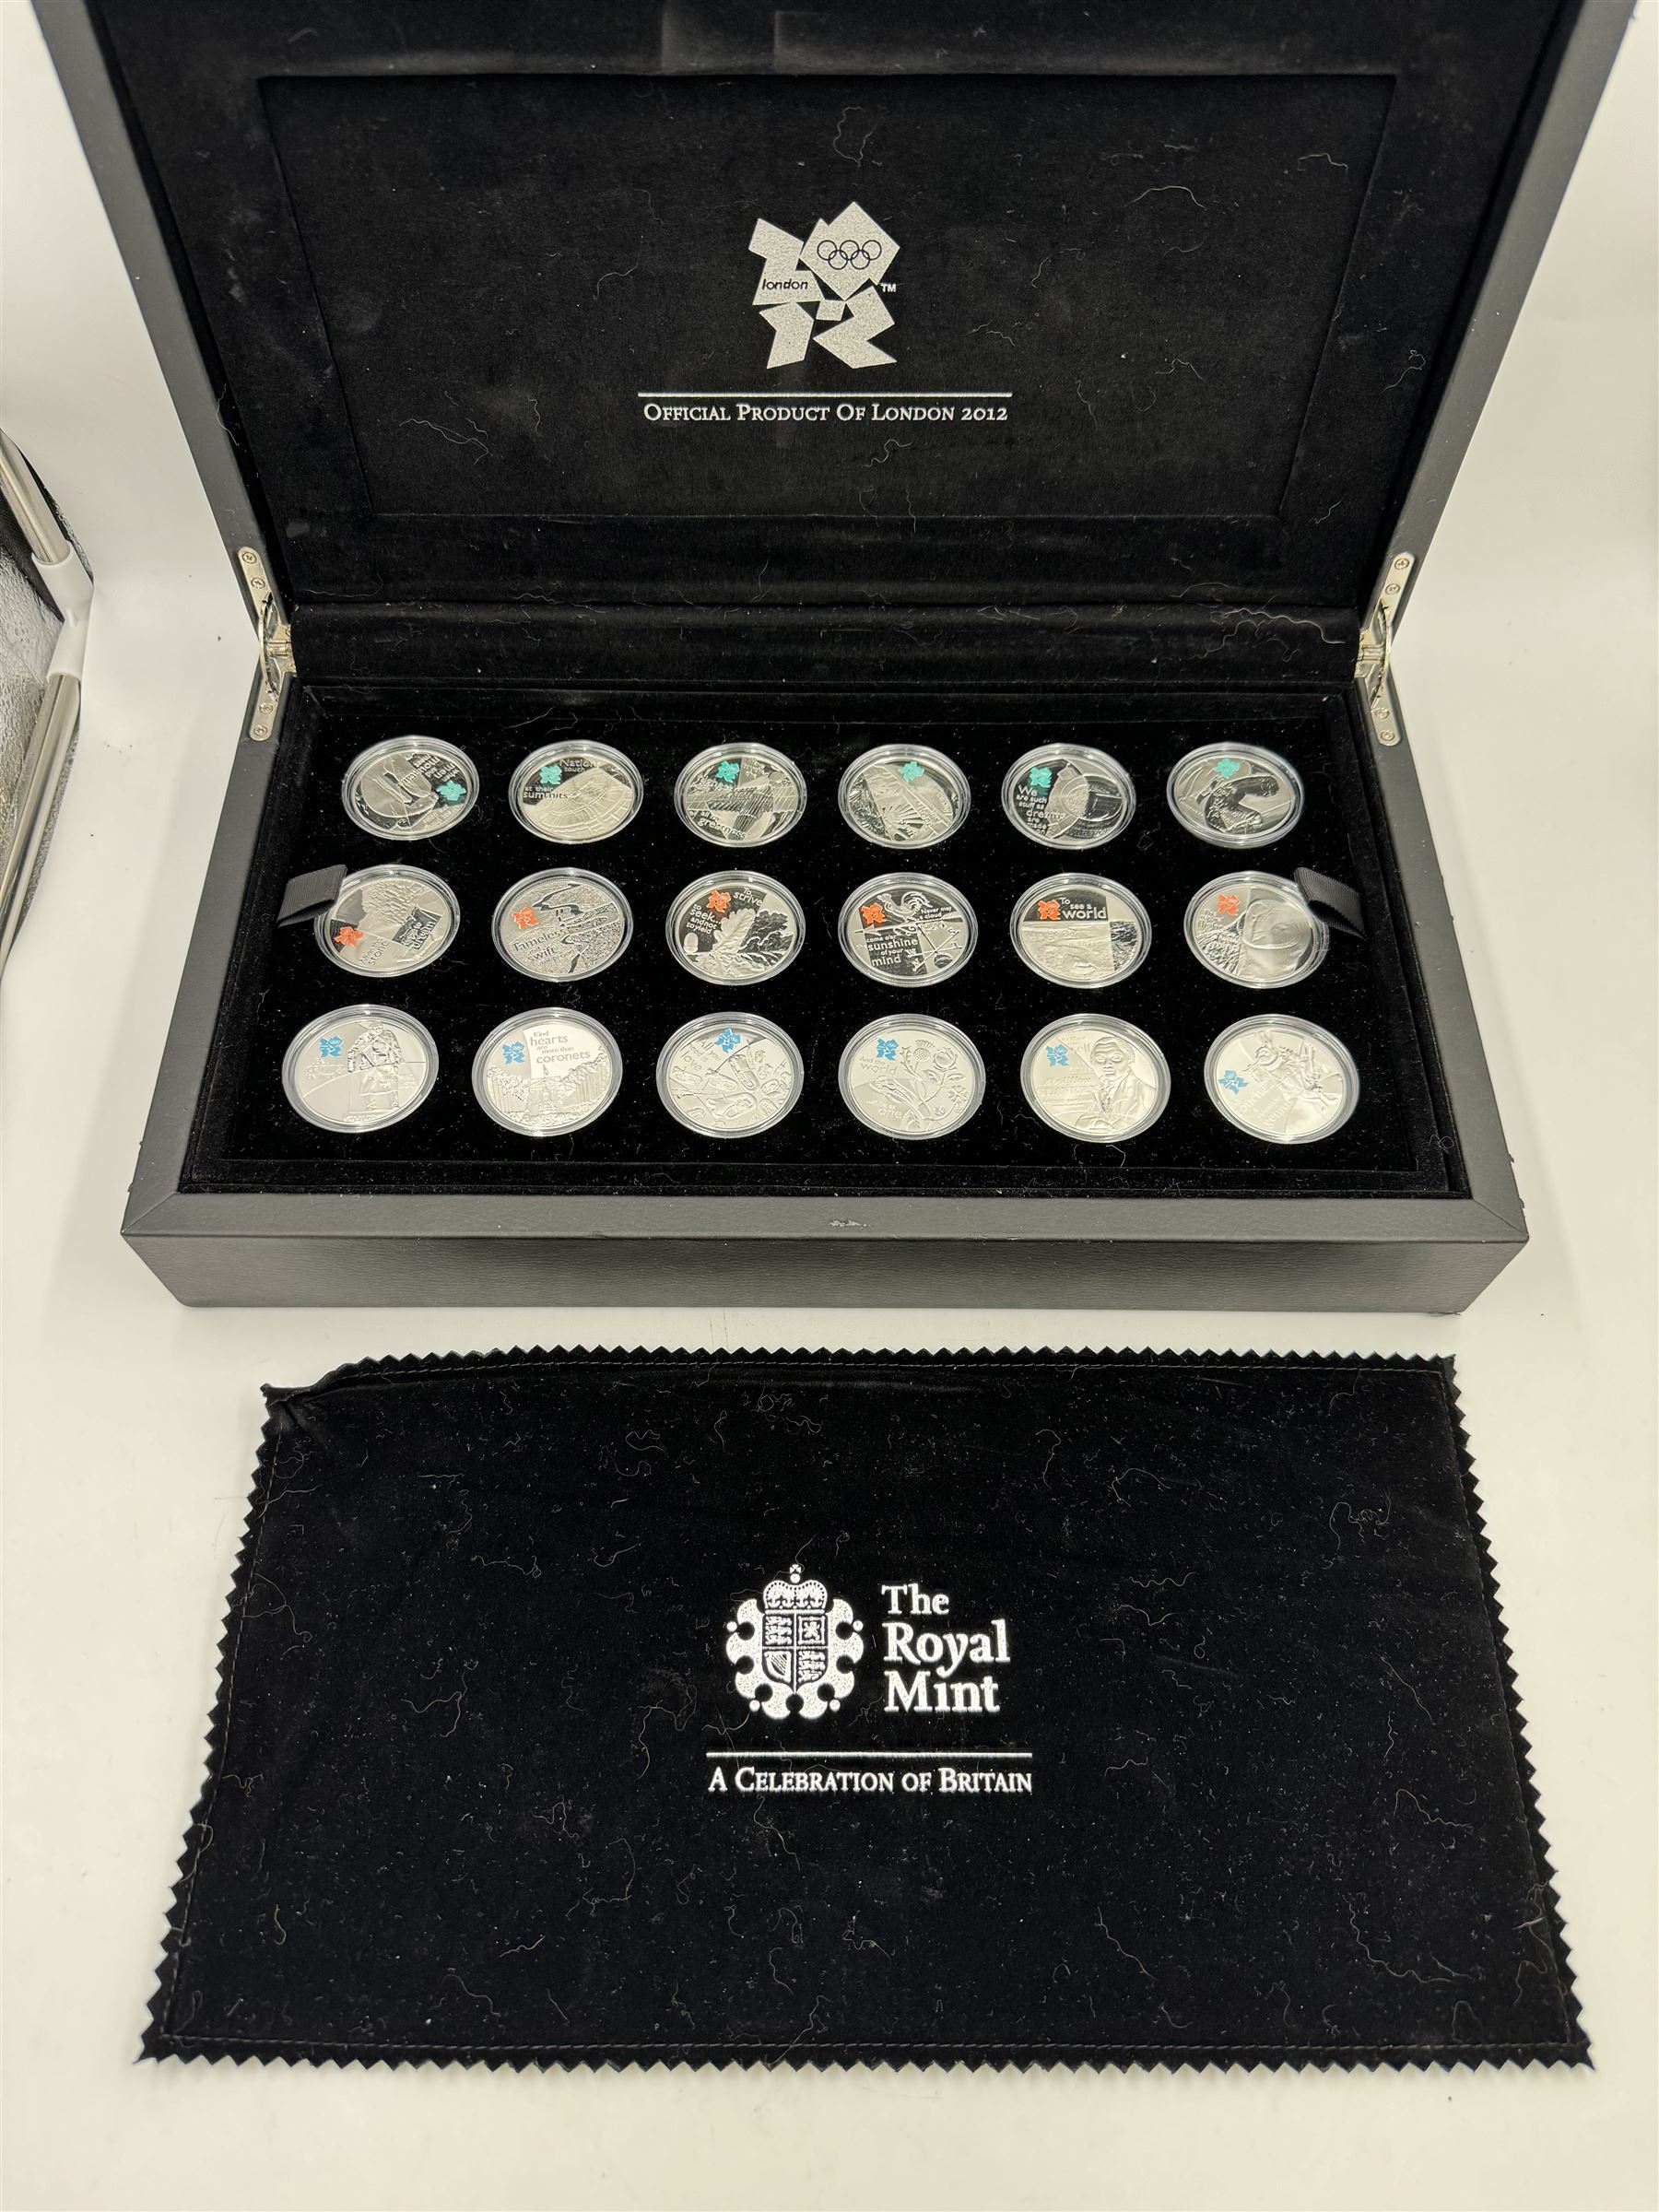 The Royal Mint United Kingdom 'A Celebration of Britain' silver proof coin set - Image 3 of 4